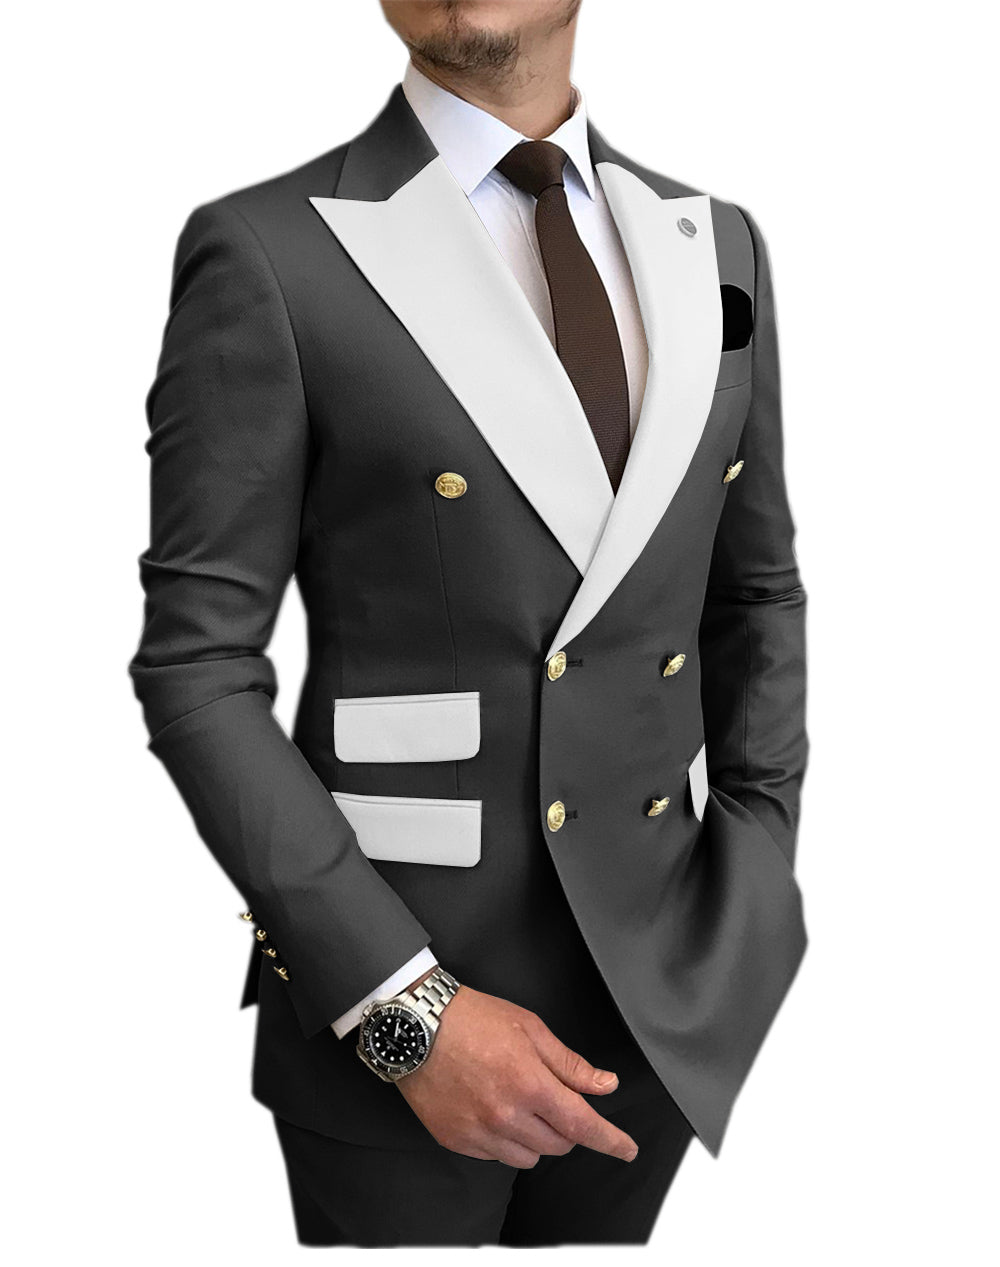 Casual Men's Suit Slim Fit Double Breasted 2 Piece Business Tuxedos (Blazer+Pants) mens event wear